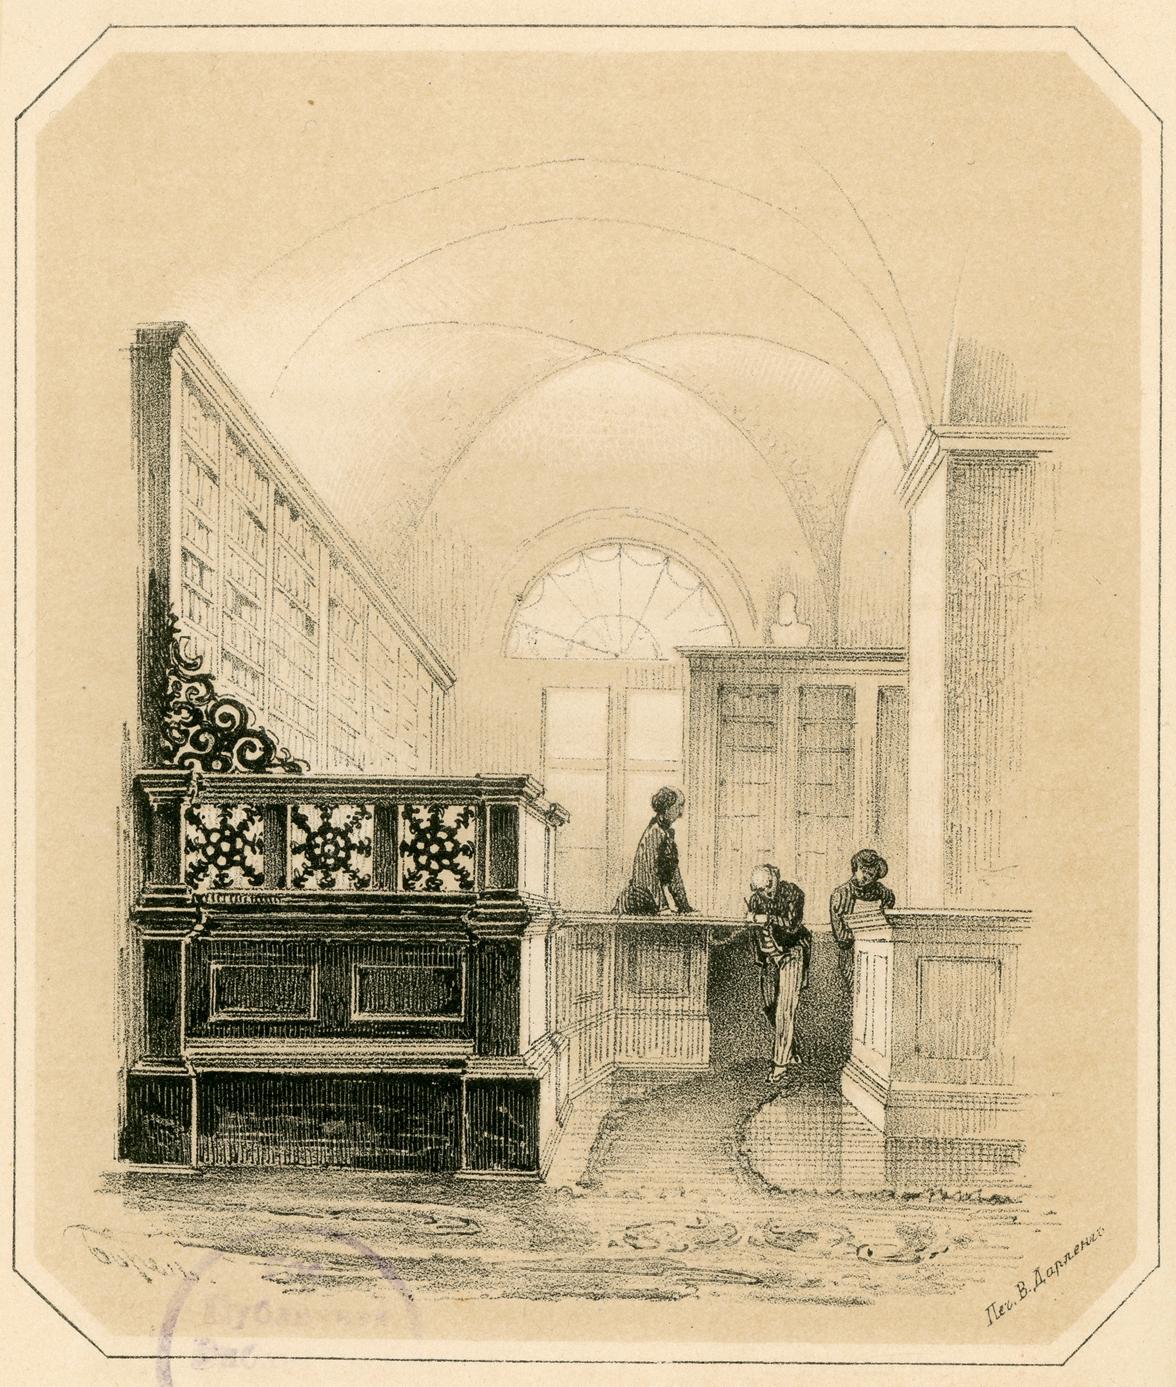 Reader Service Desk in the Manuscripts Reading Room of the Imperial Public Library. Drawing by P. Borel. 1852